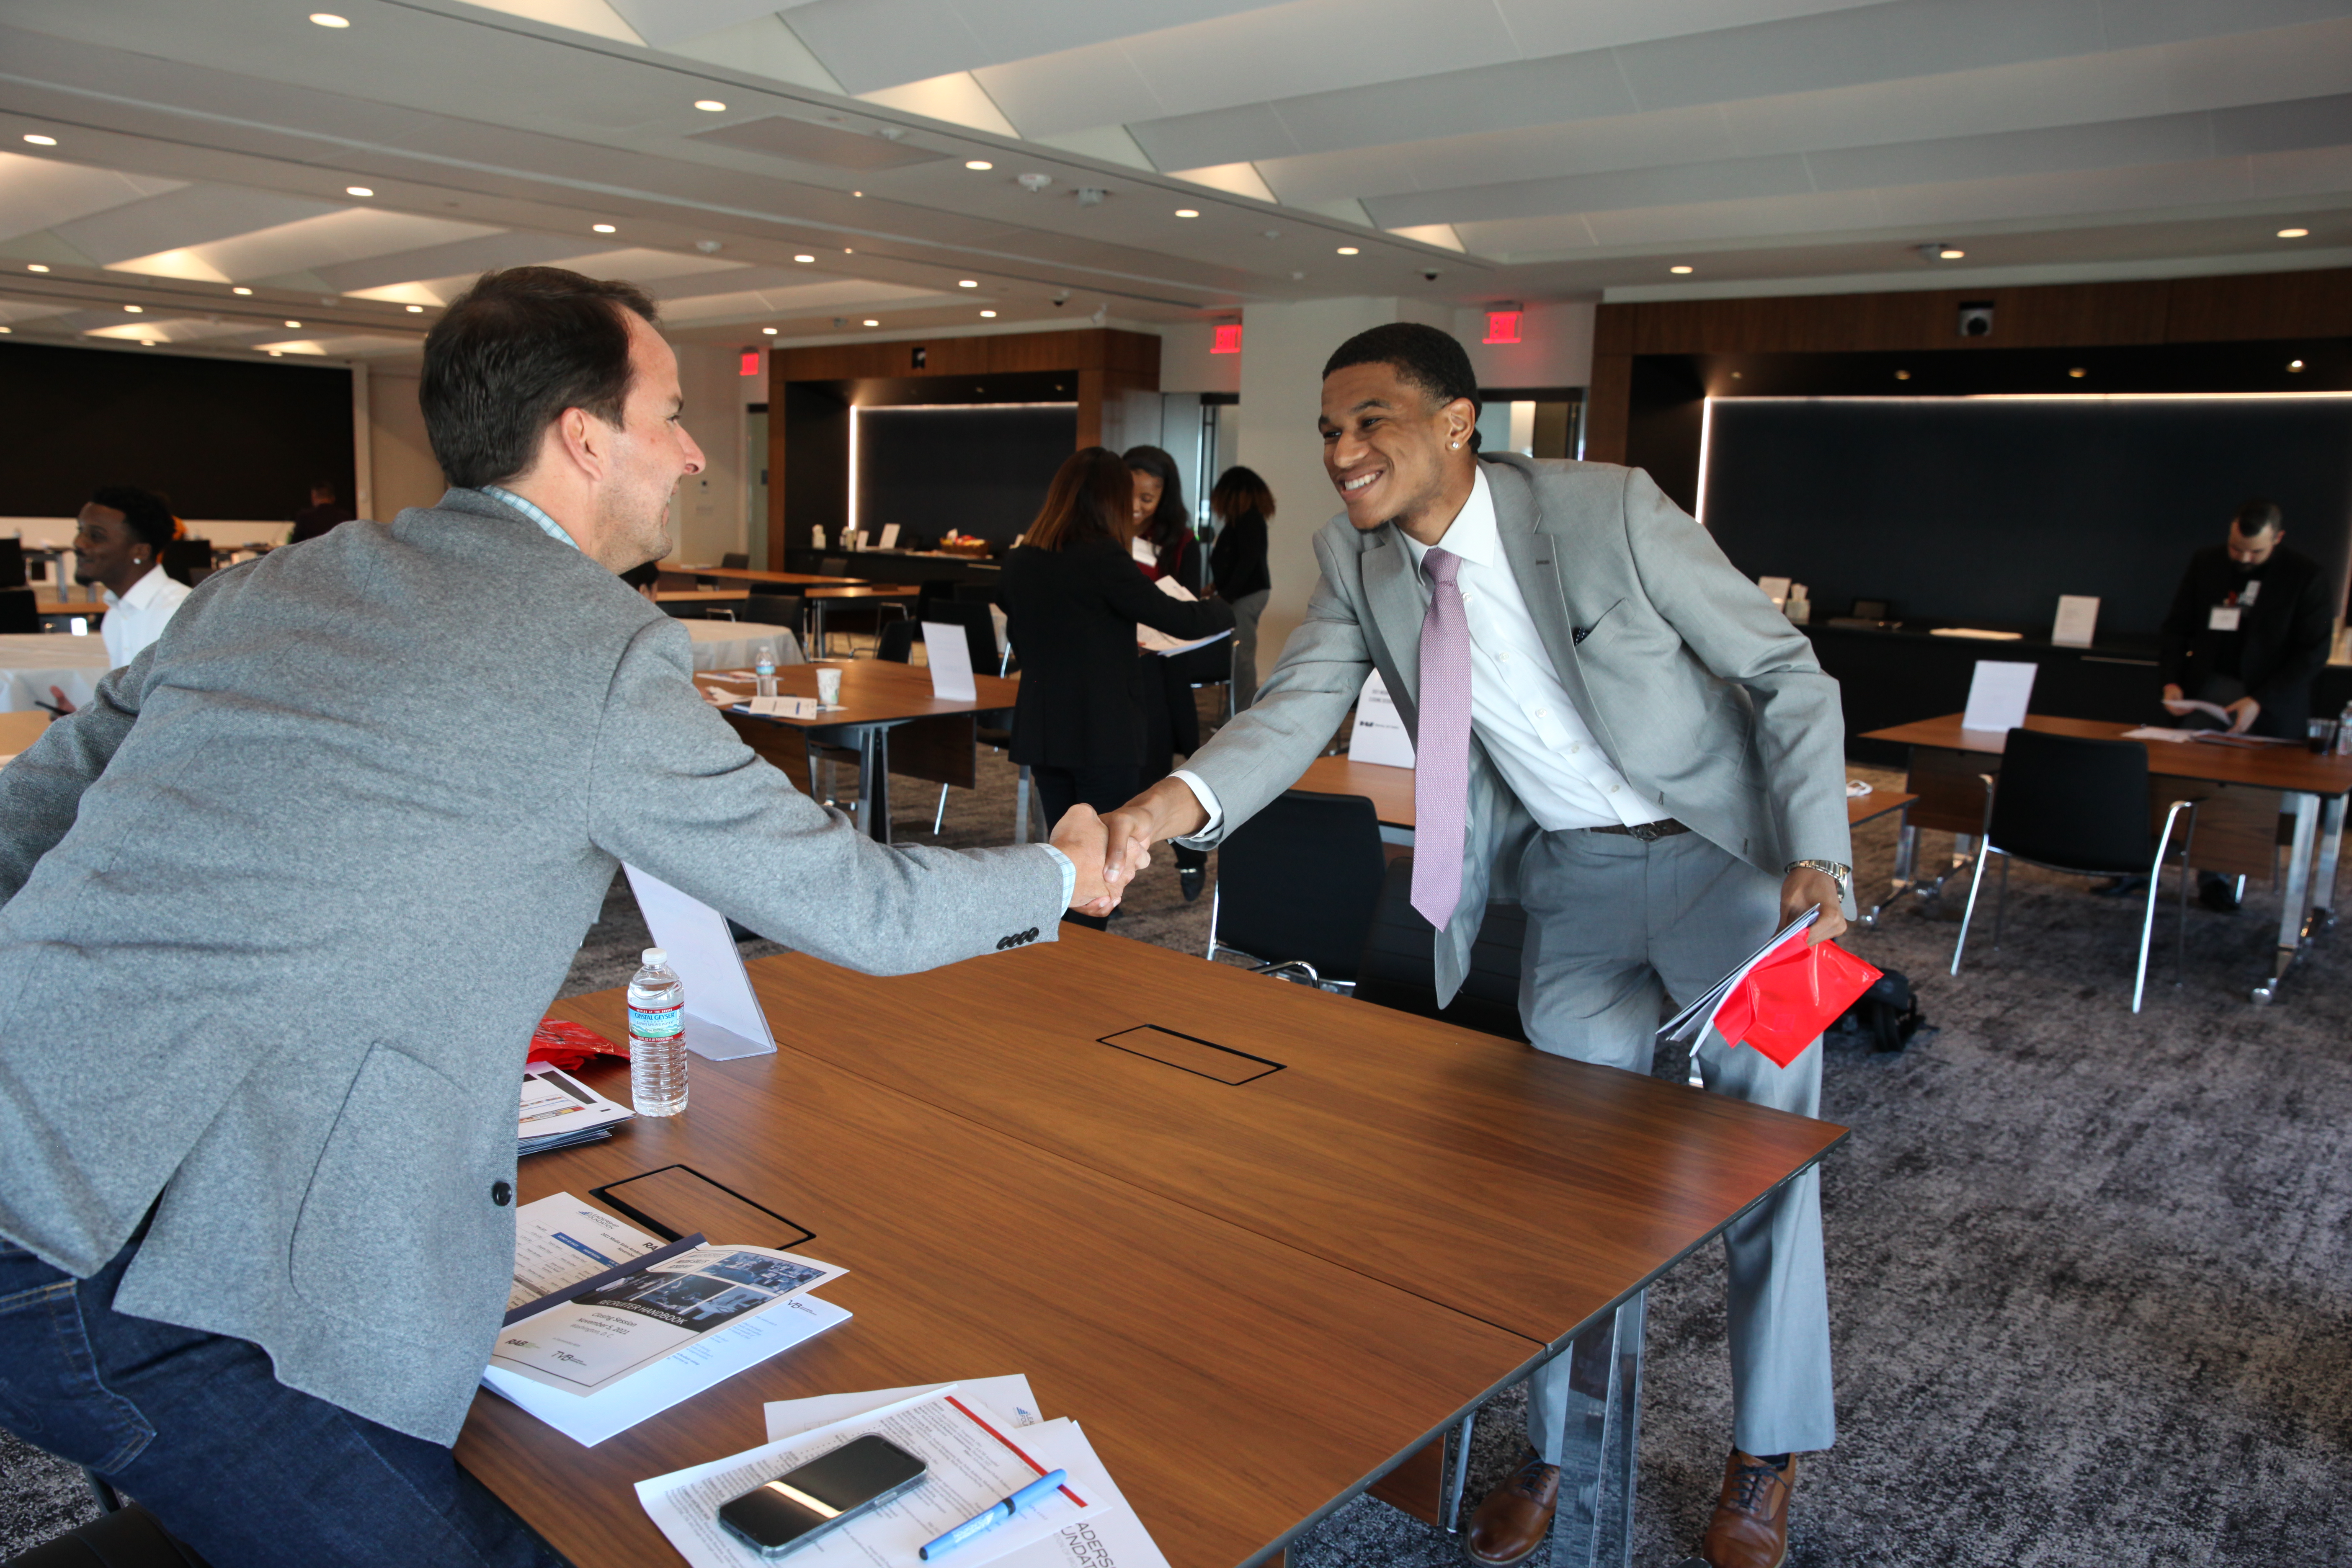 Interviewer and interviewee shaking hands at the career fair.